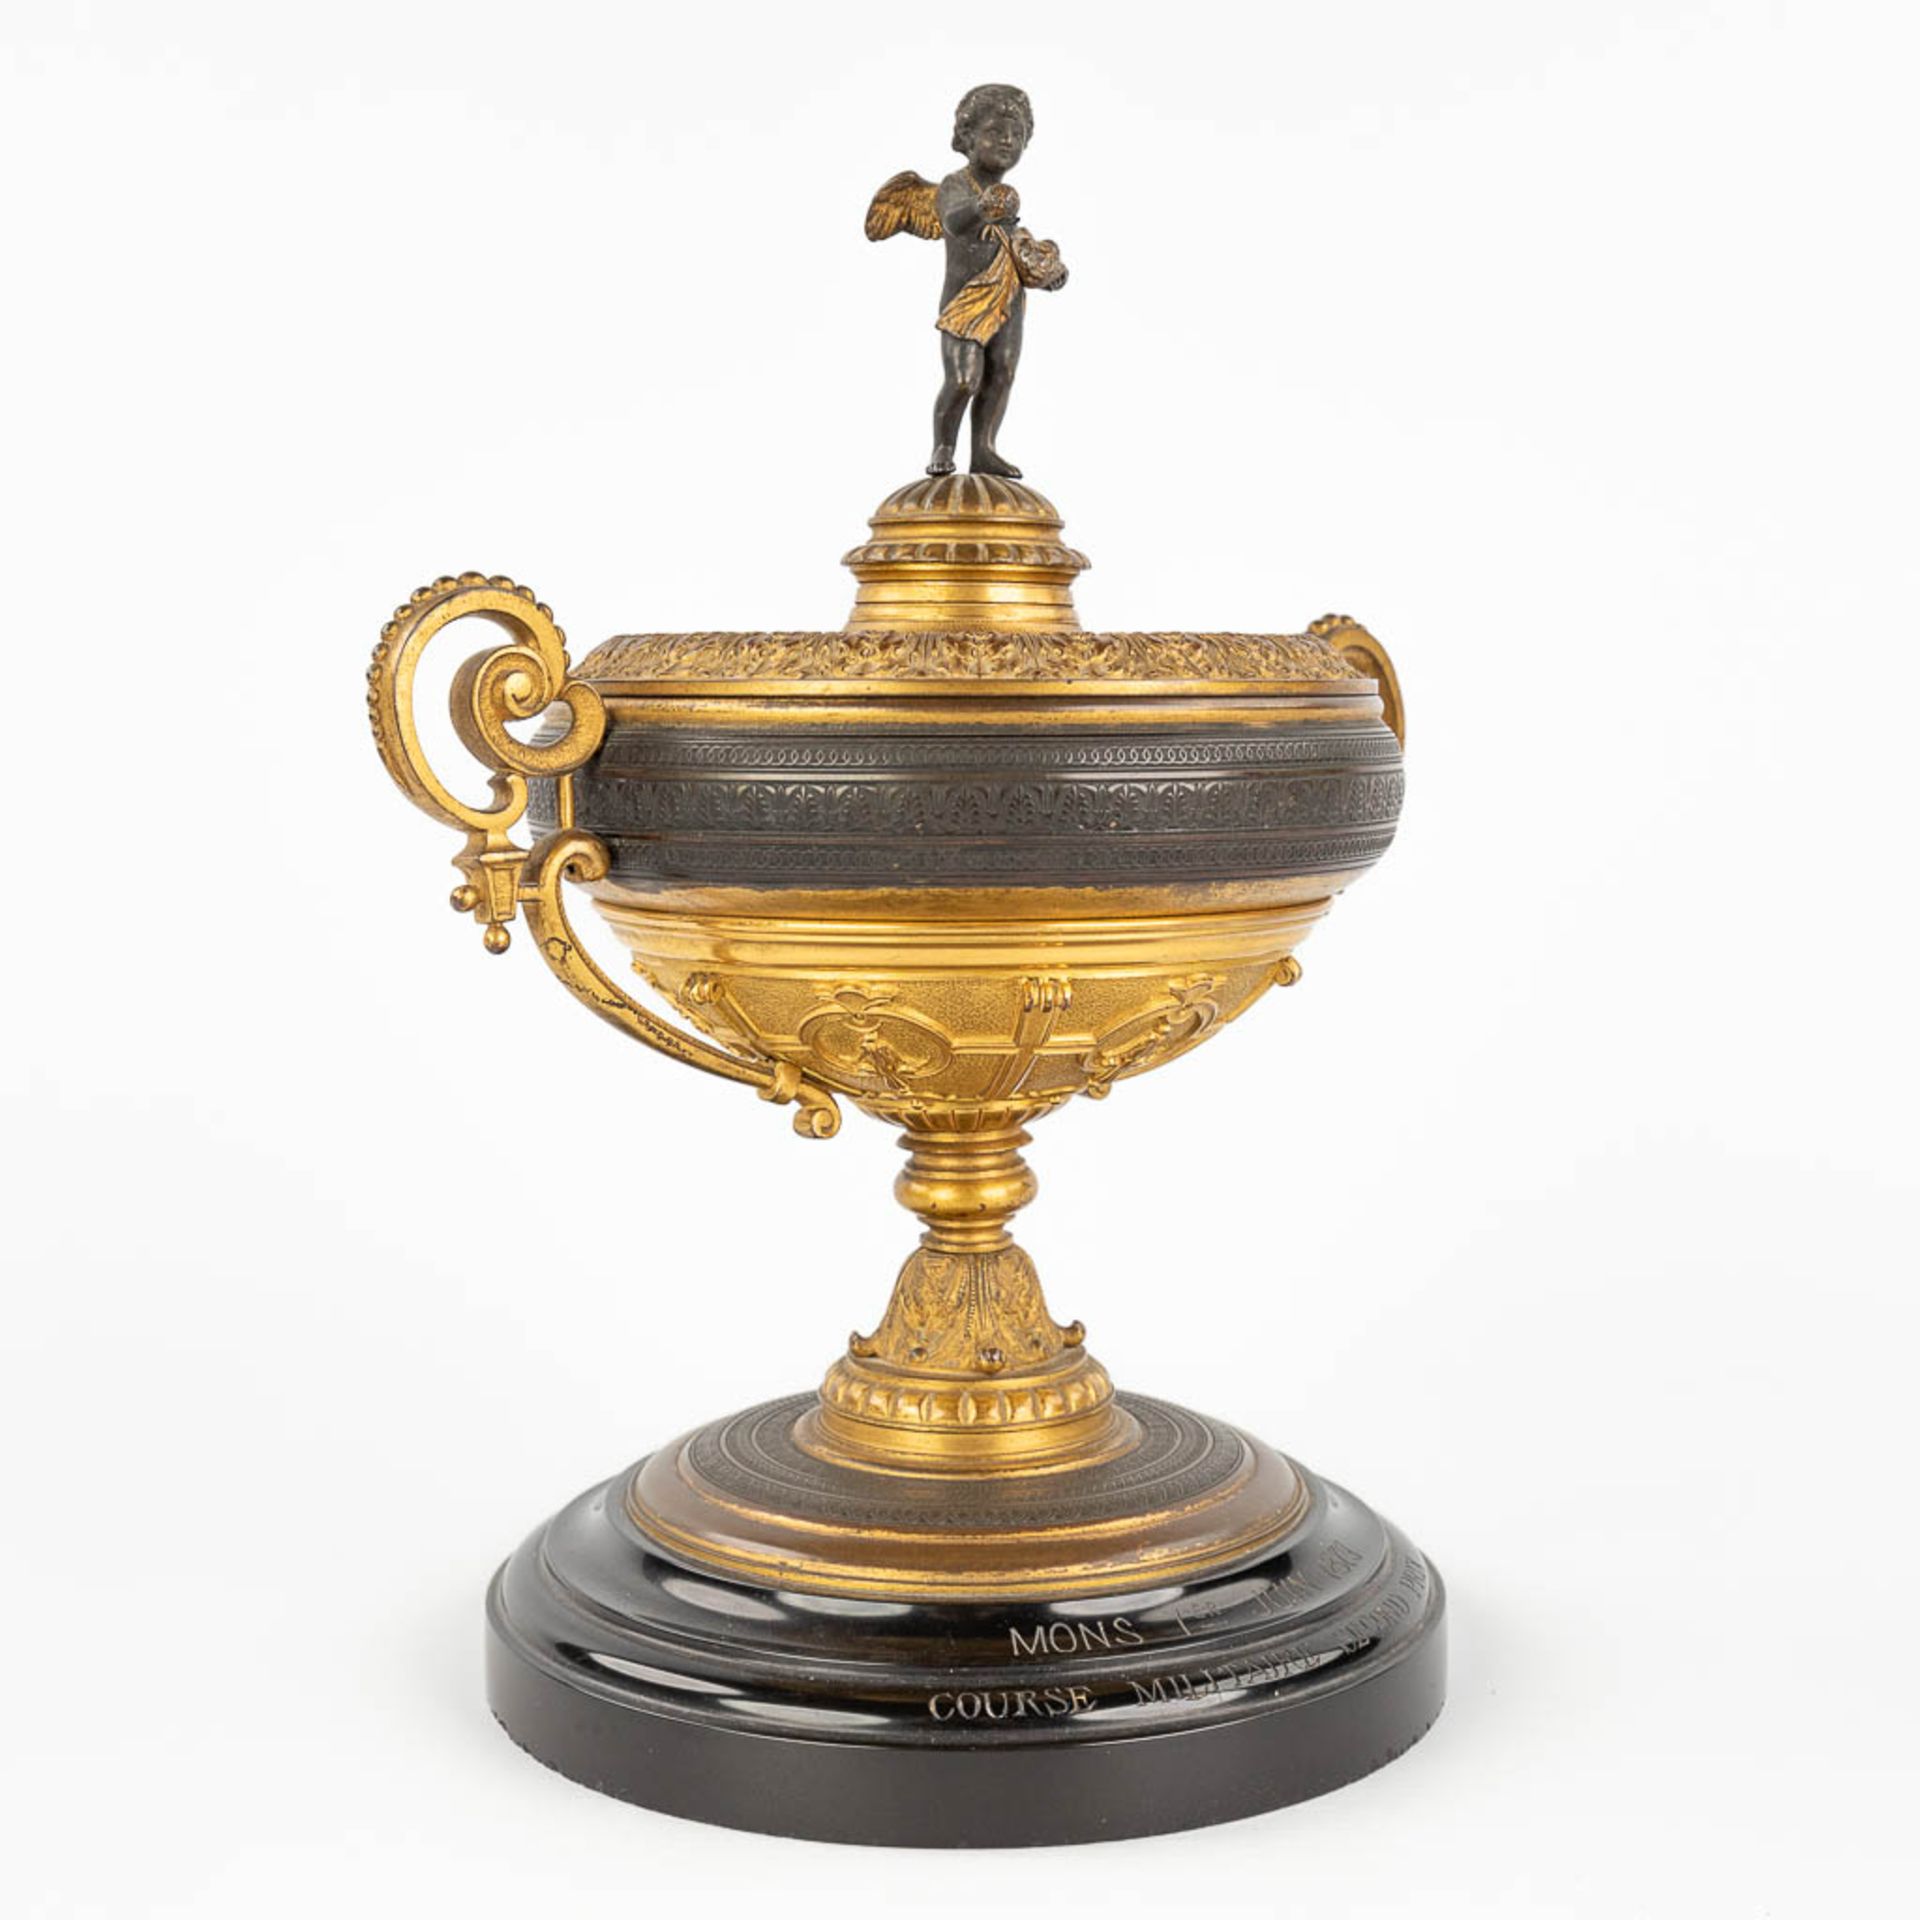 An antique trophy, made of gilt and patinated bronze. 19th C. (L: 16 x W: 22 x H: 27 cm) - Image 3 of 14